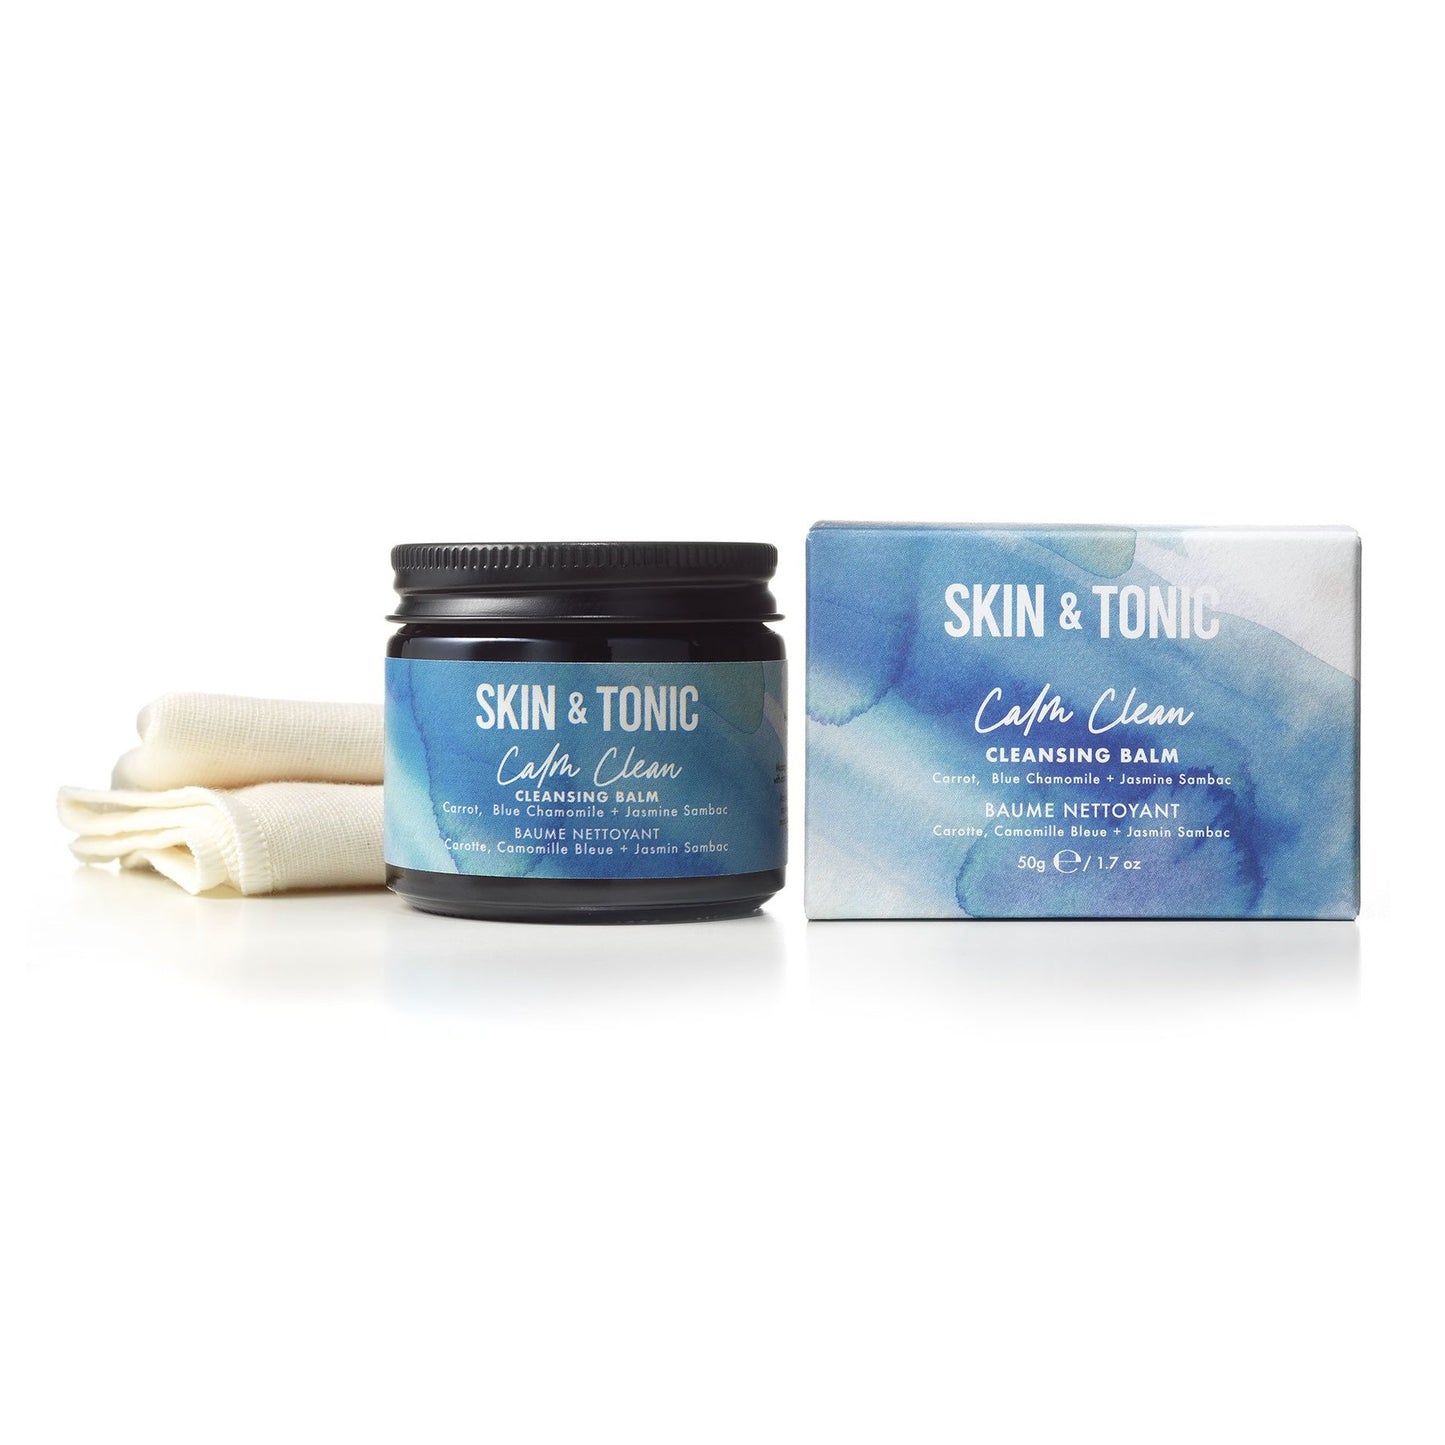 Skin & Tonic Calm Clean Cleansing Balm | 100% Natural, nourishing cleansing balm with organic cotton hot cloth | Vegan, Cruelty Free